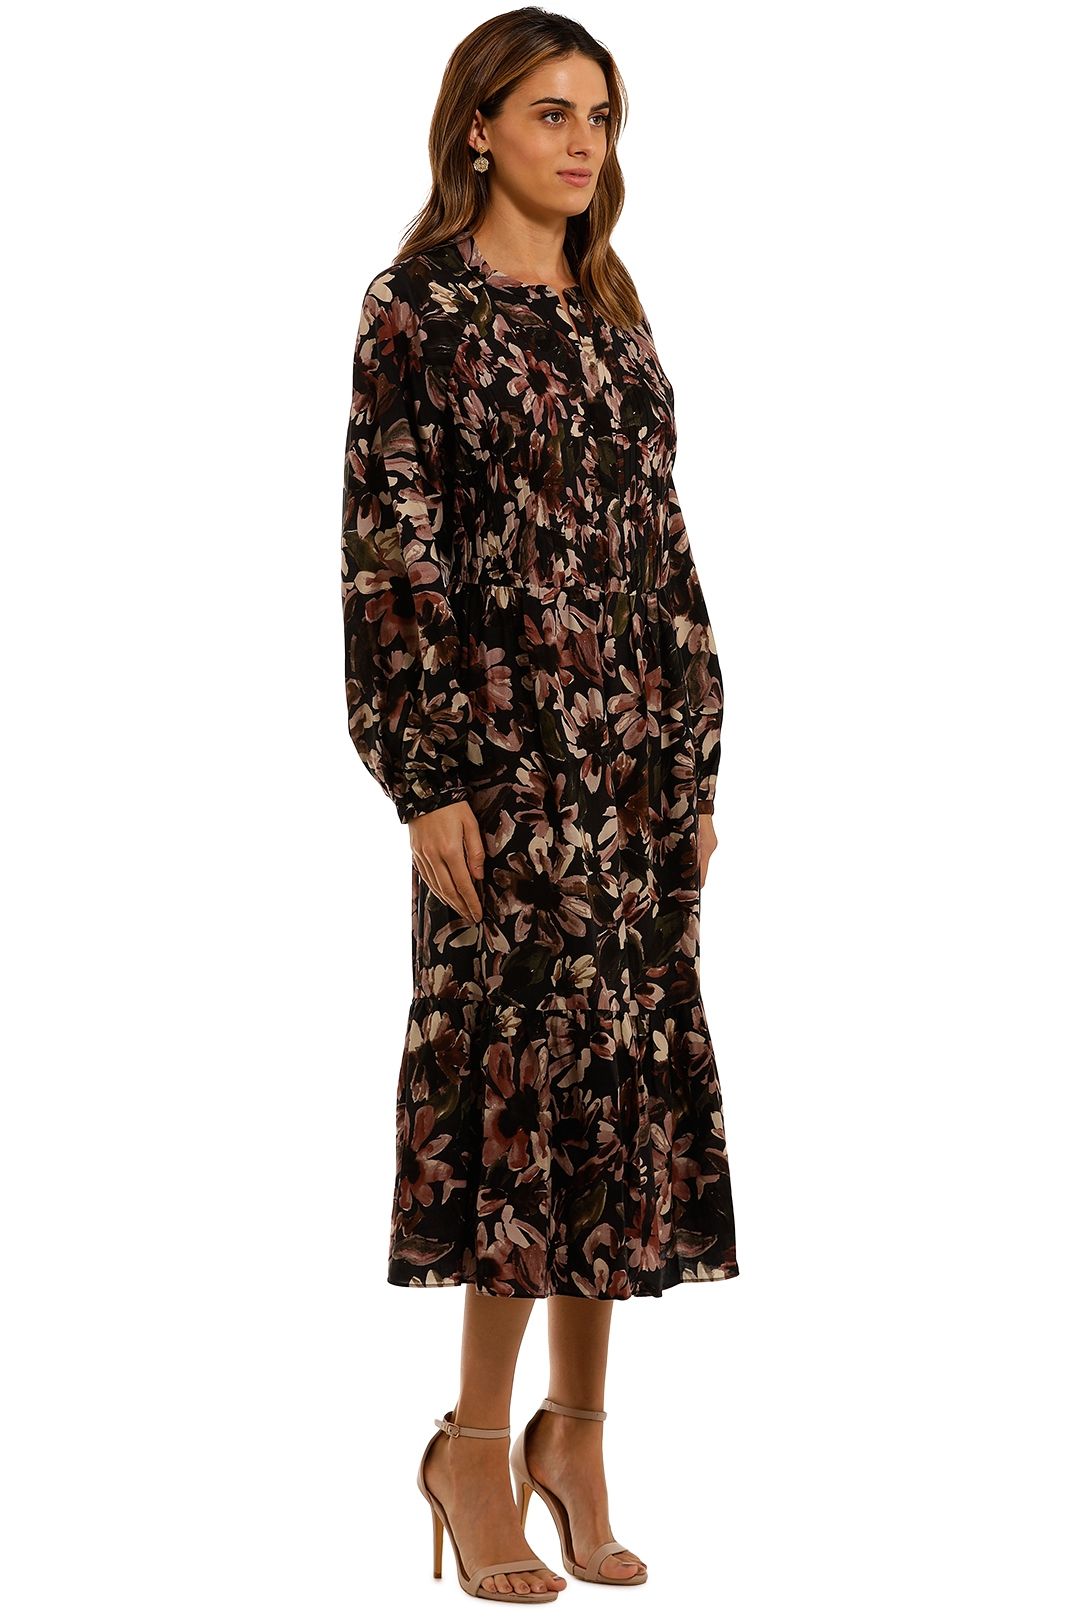 Witchery Tuck Bodice Dress Floral long sleeve